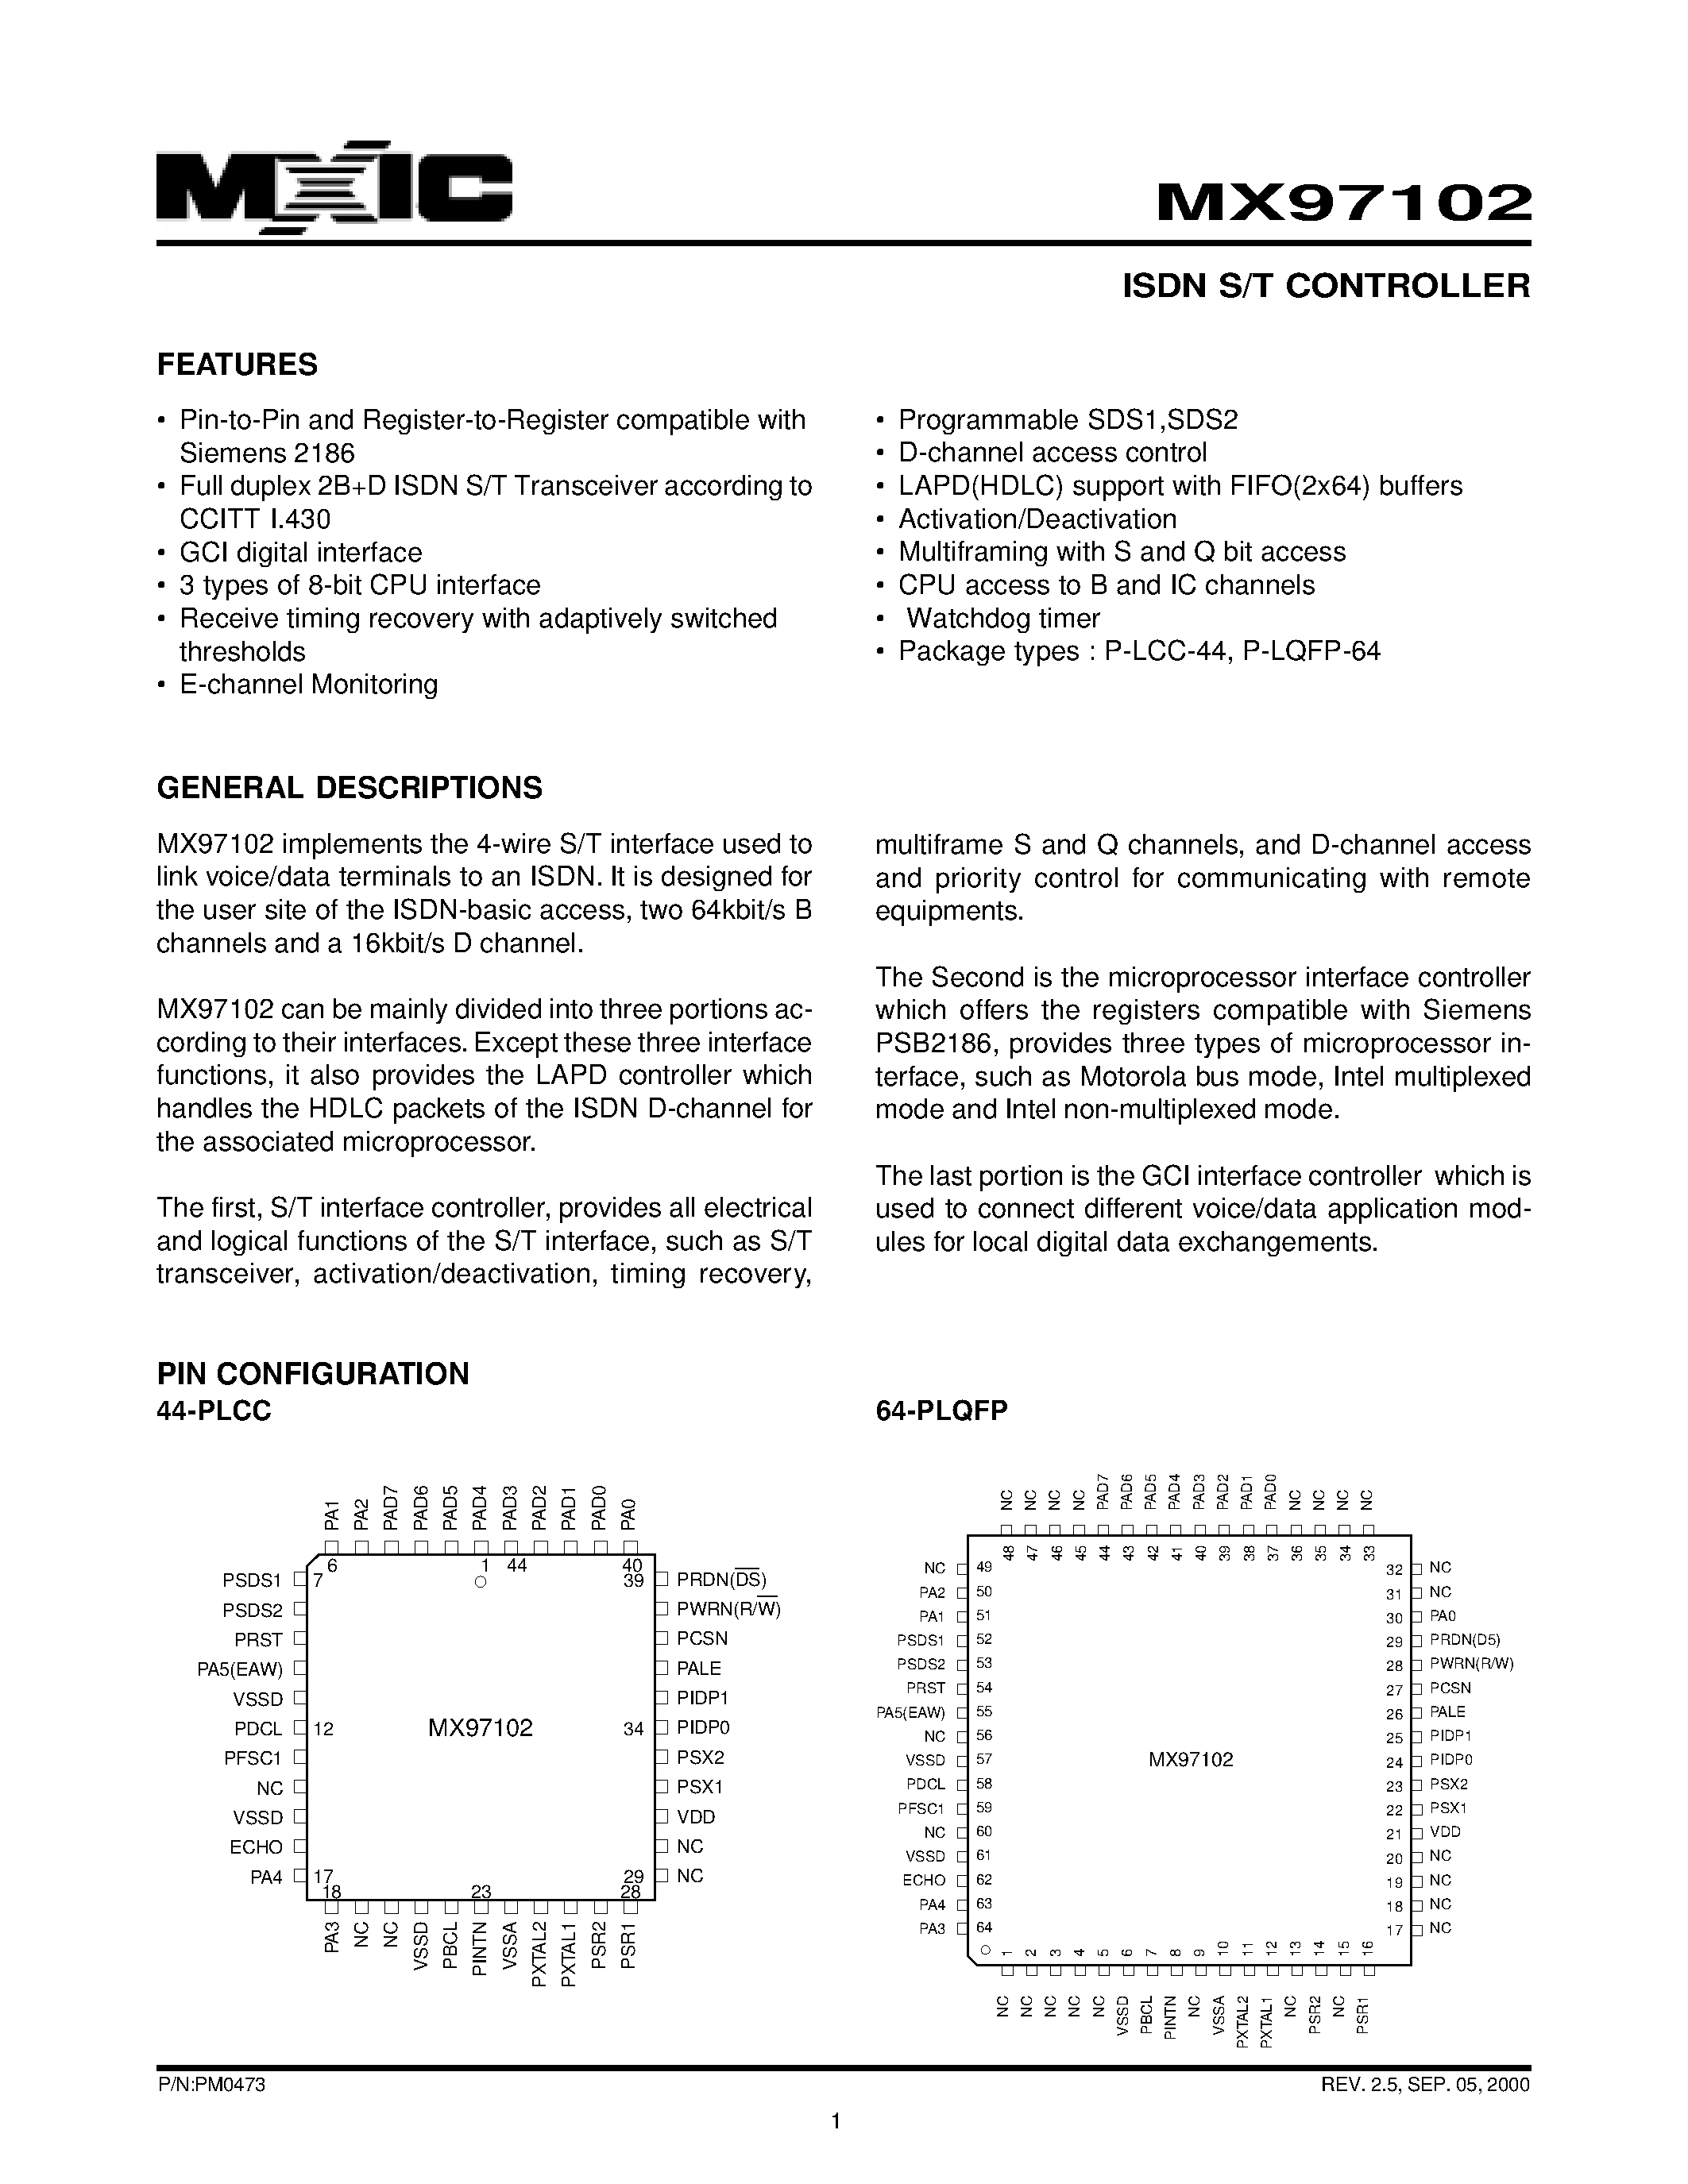 Datasheet MX97102UC - ISDN S/T CONTROLLER page 1